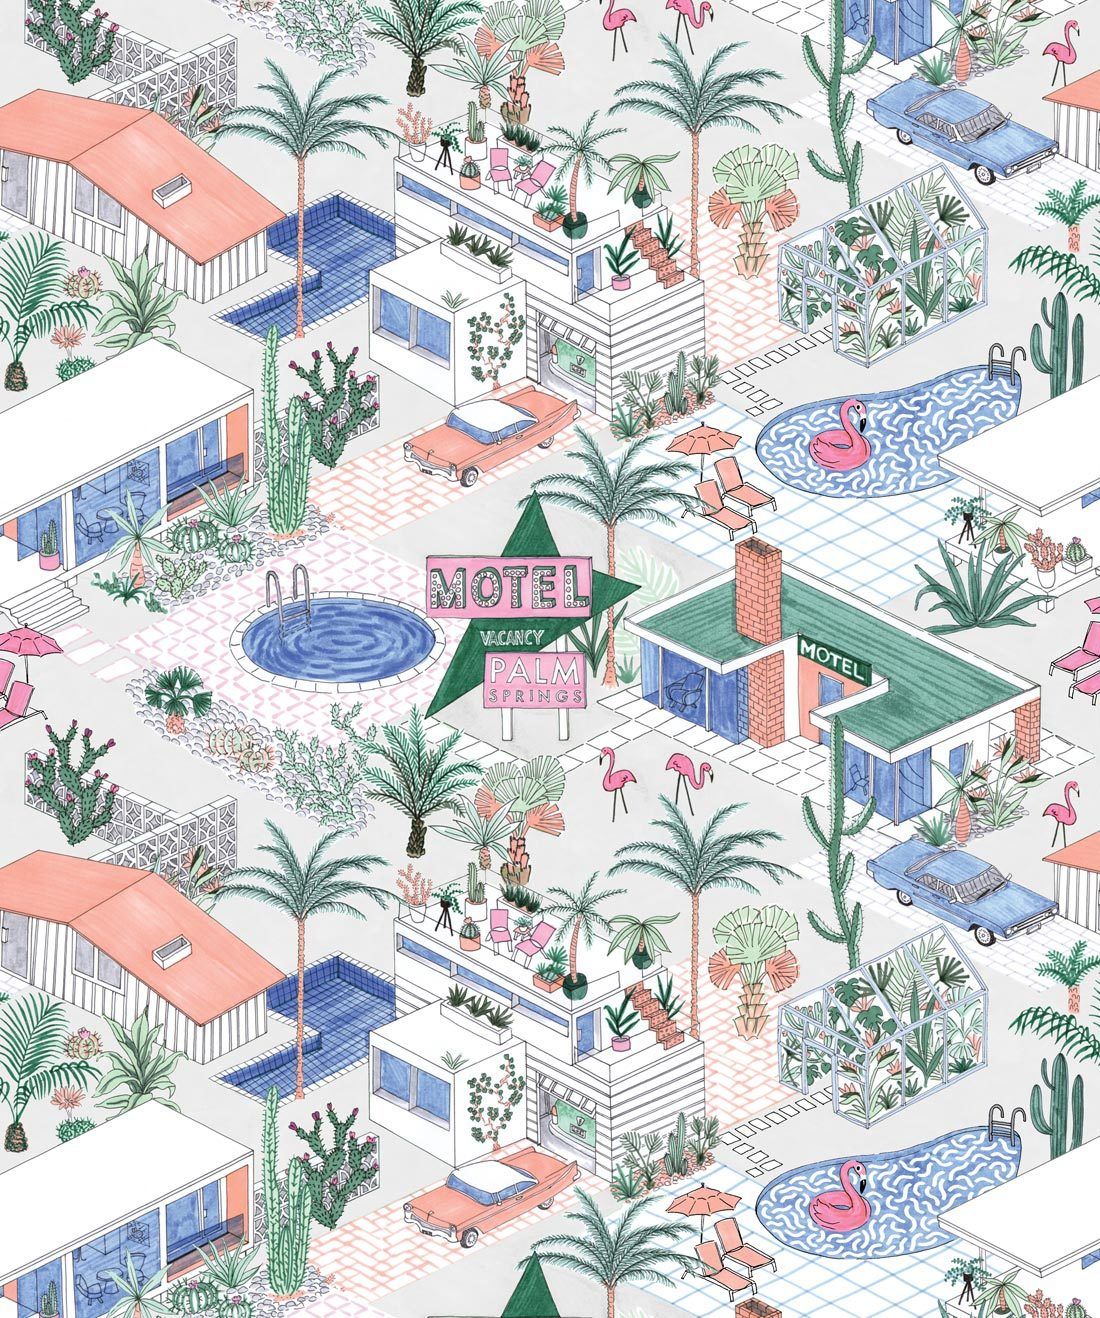 Palms Springs is a Mid Century Urban Wallpaper